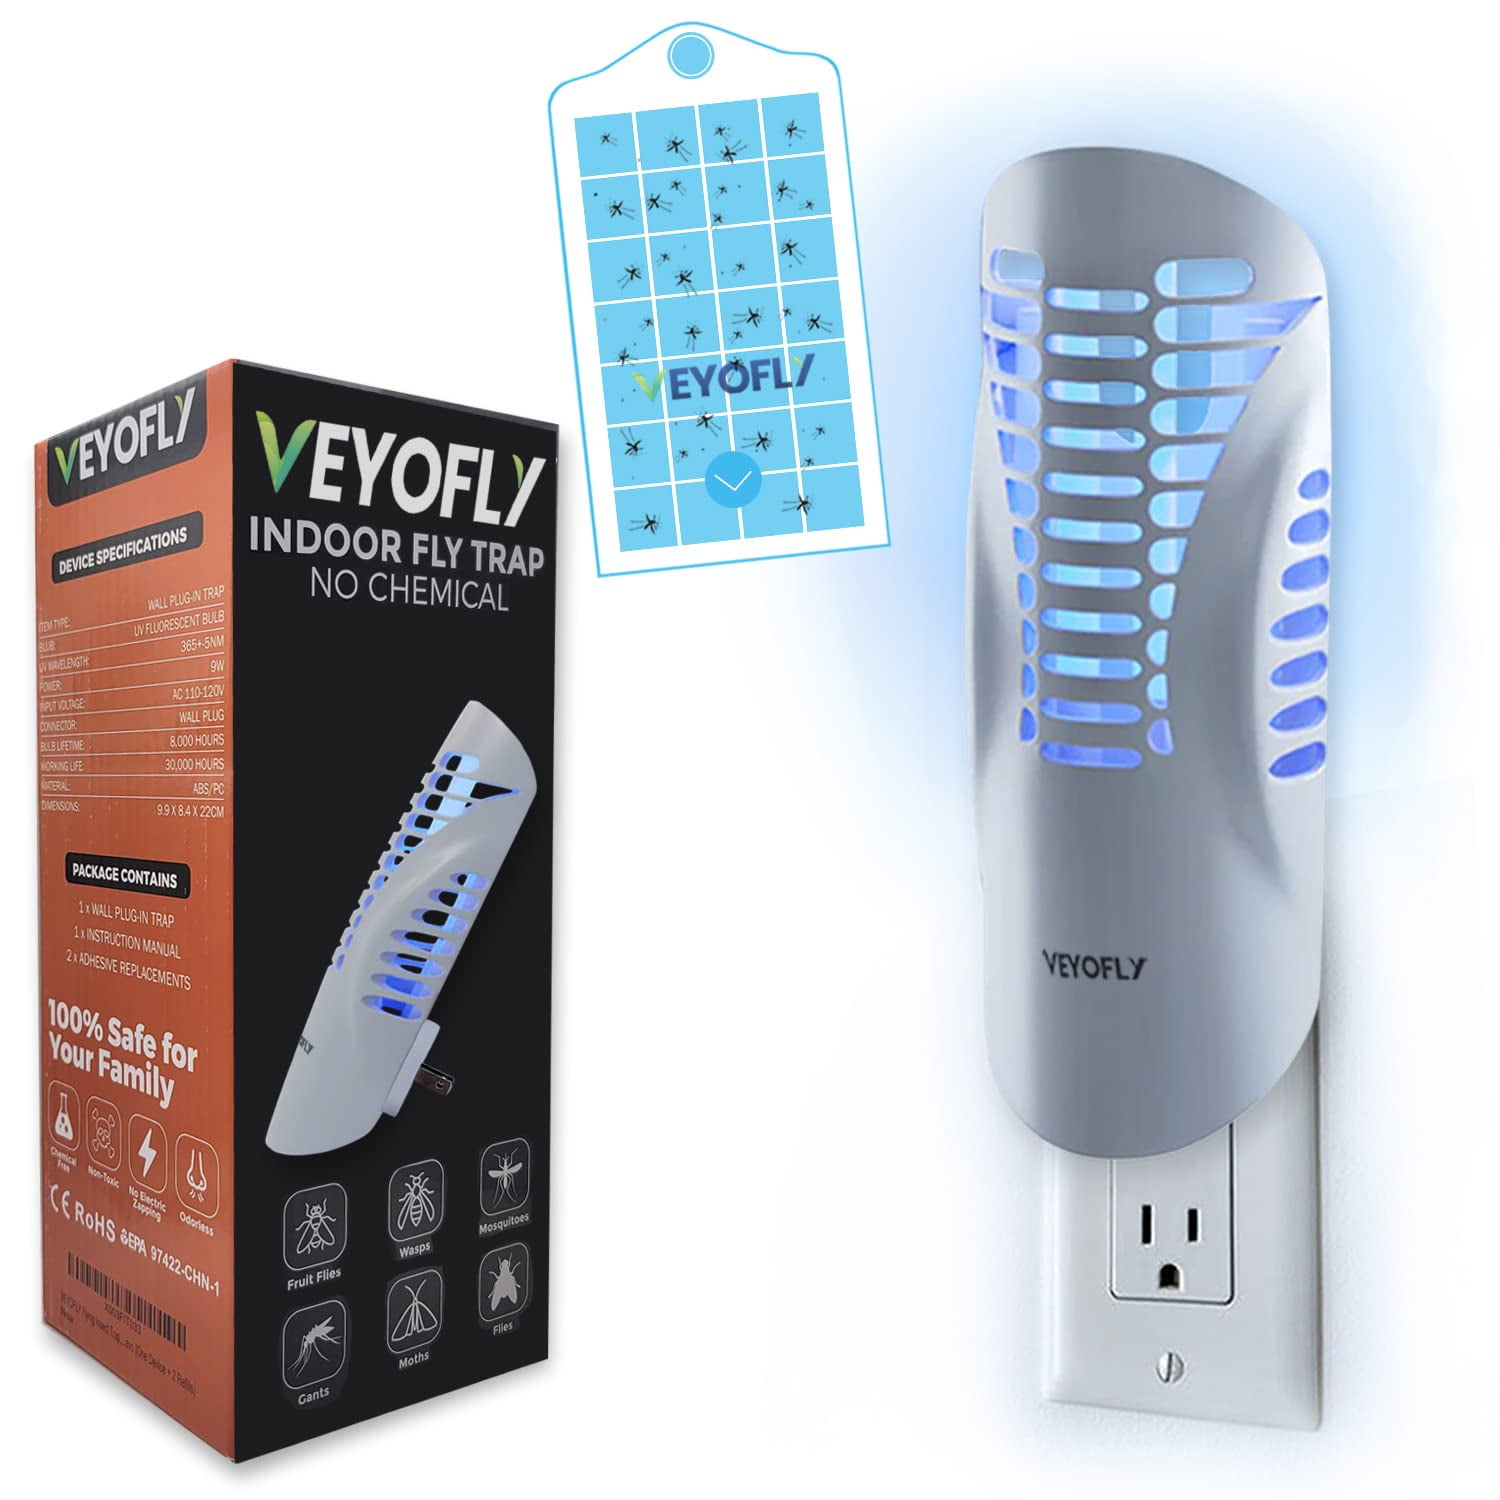 VEYOFLY Fly Trap, Plug in Flying Insect Trap, Fruit Brazil